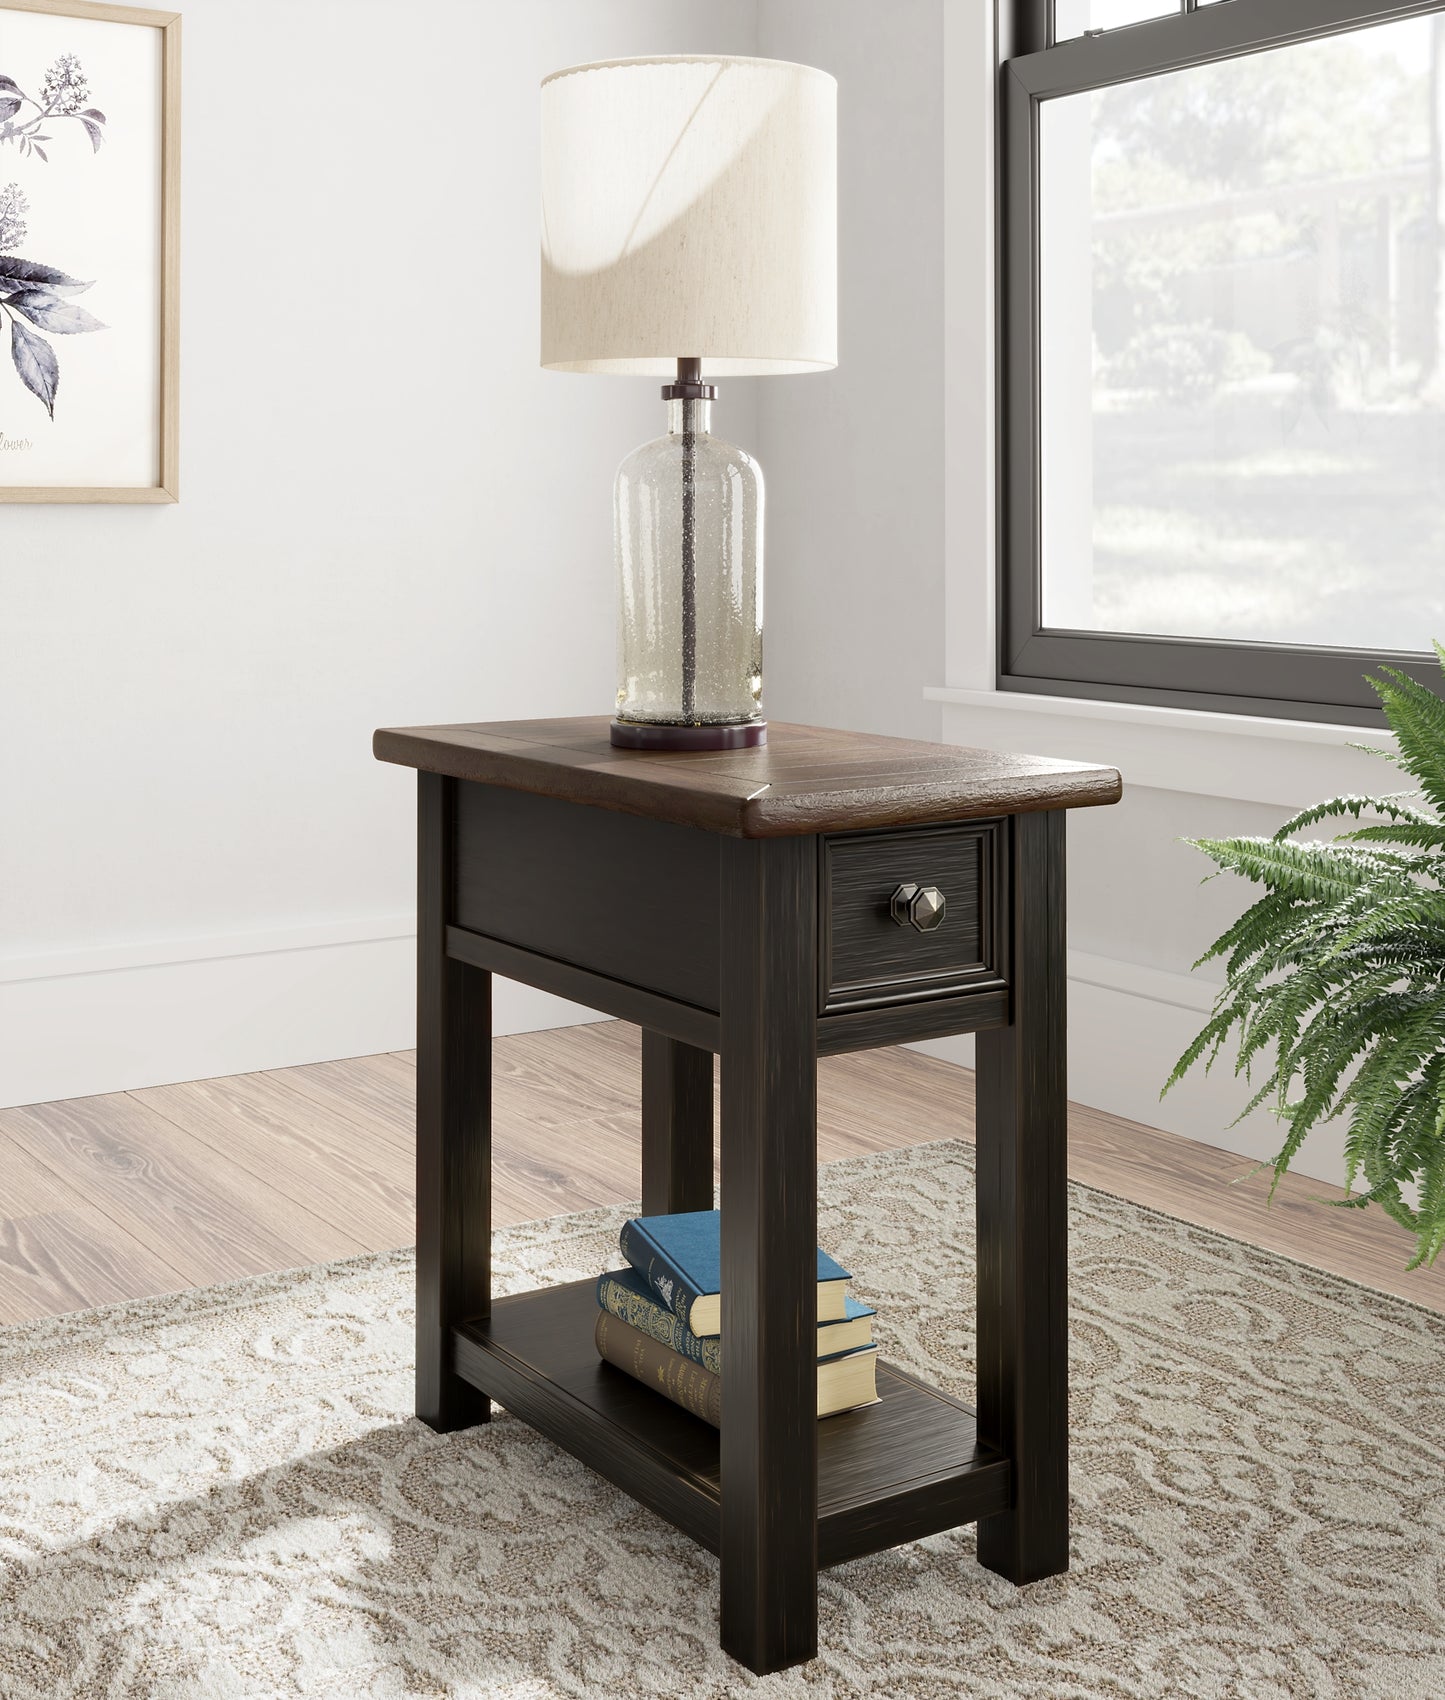 Tyler Creek Coffee Table with 2 End Tables Wilson Furniture (OH)  in Bridgeport, Ohio. Serving Moundsville, Richmond, Smithfield, Cadiz, & St. Clairesville